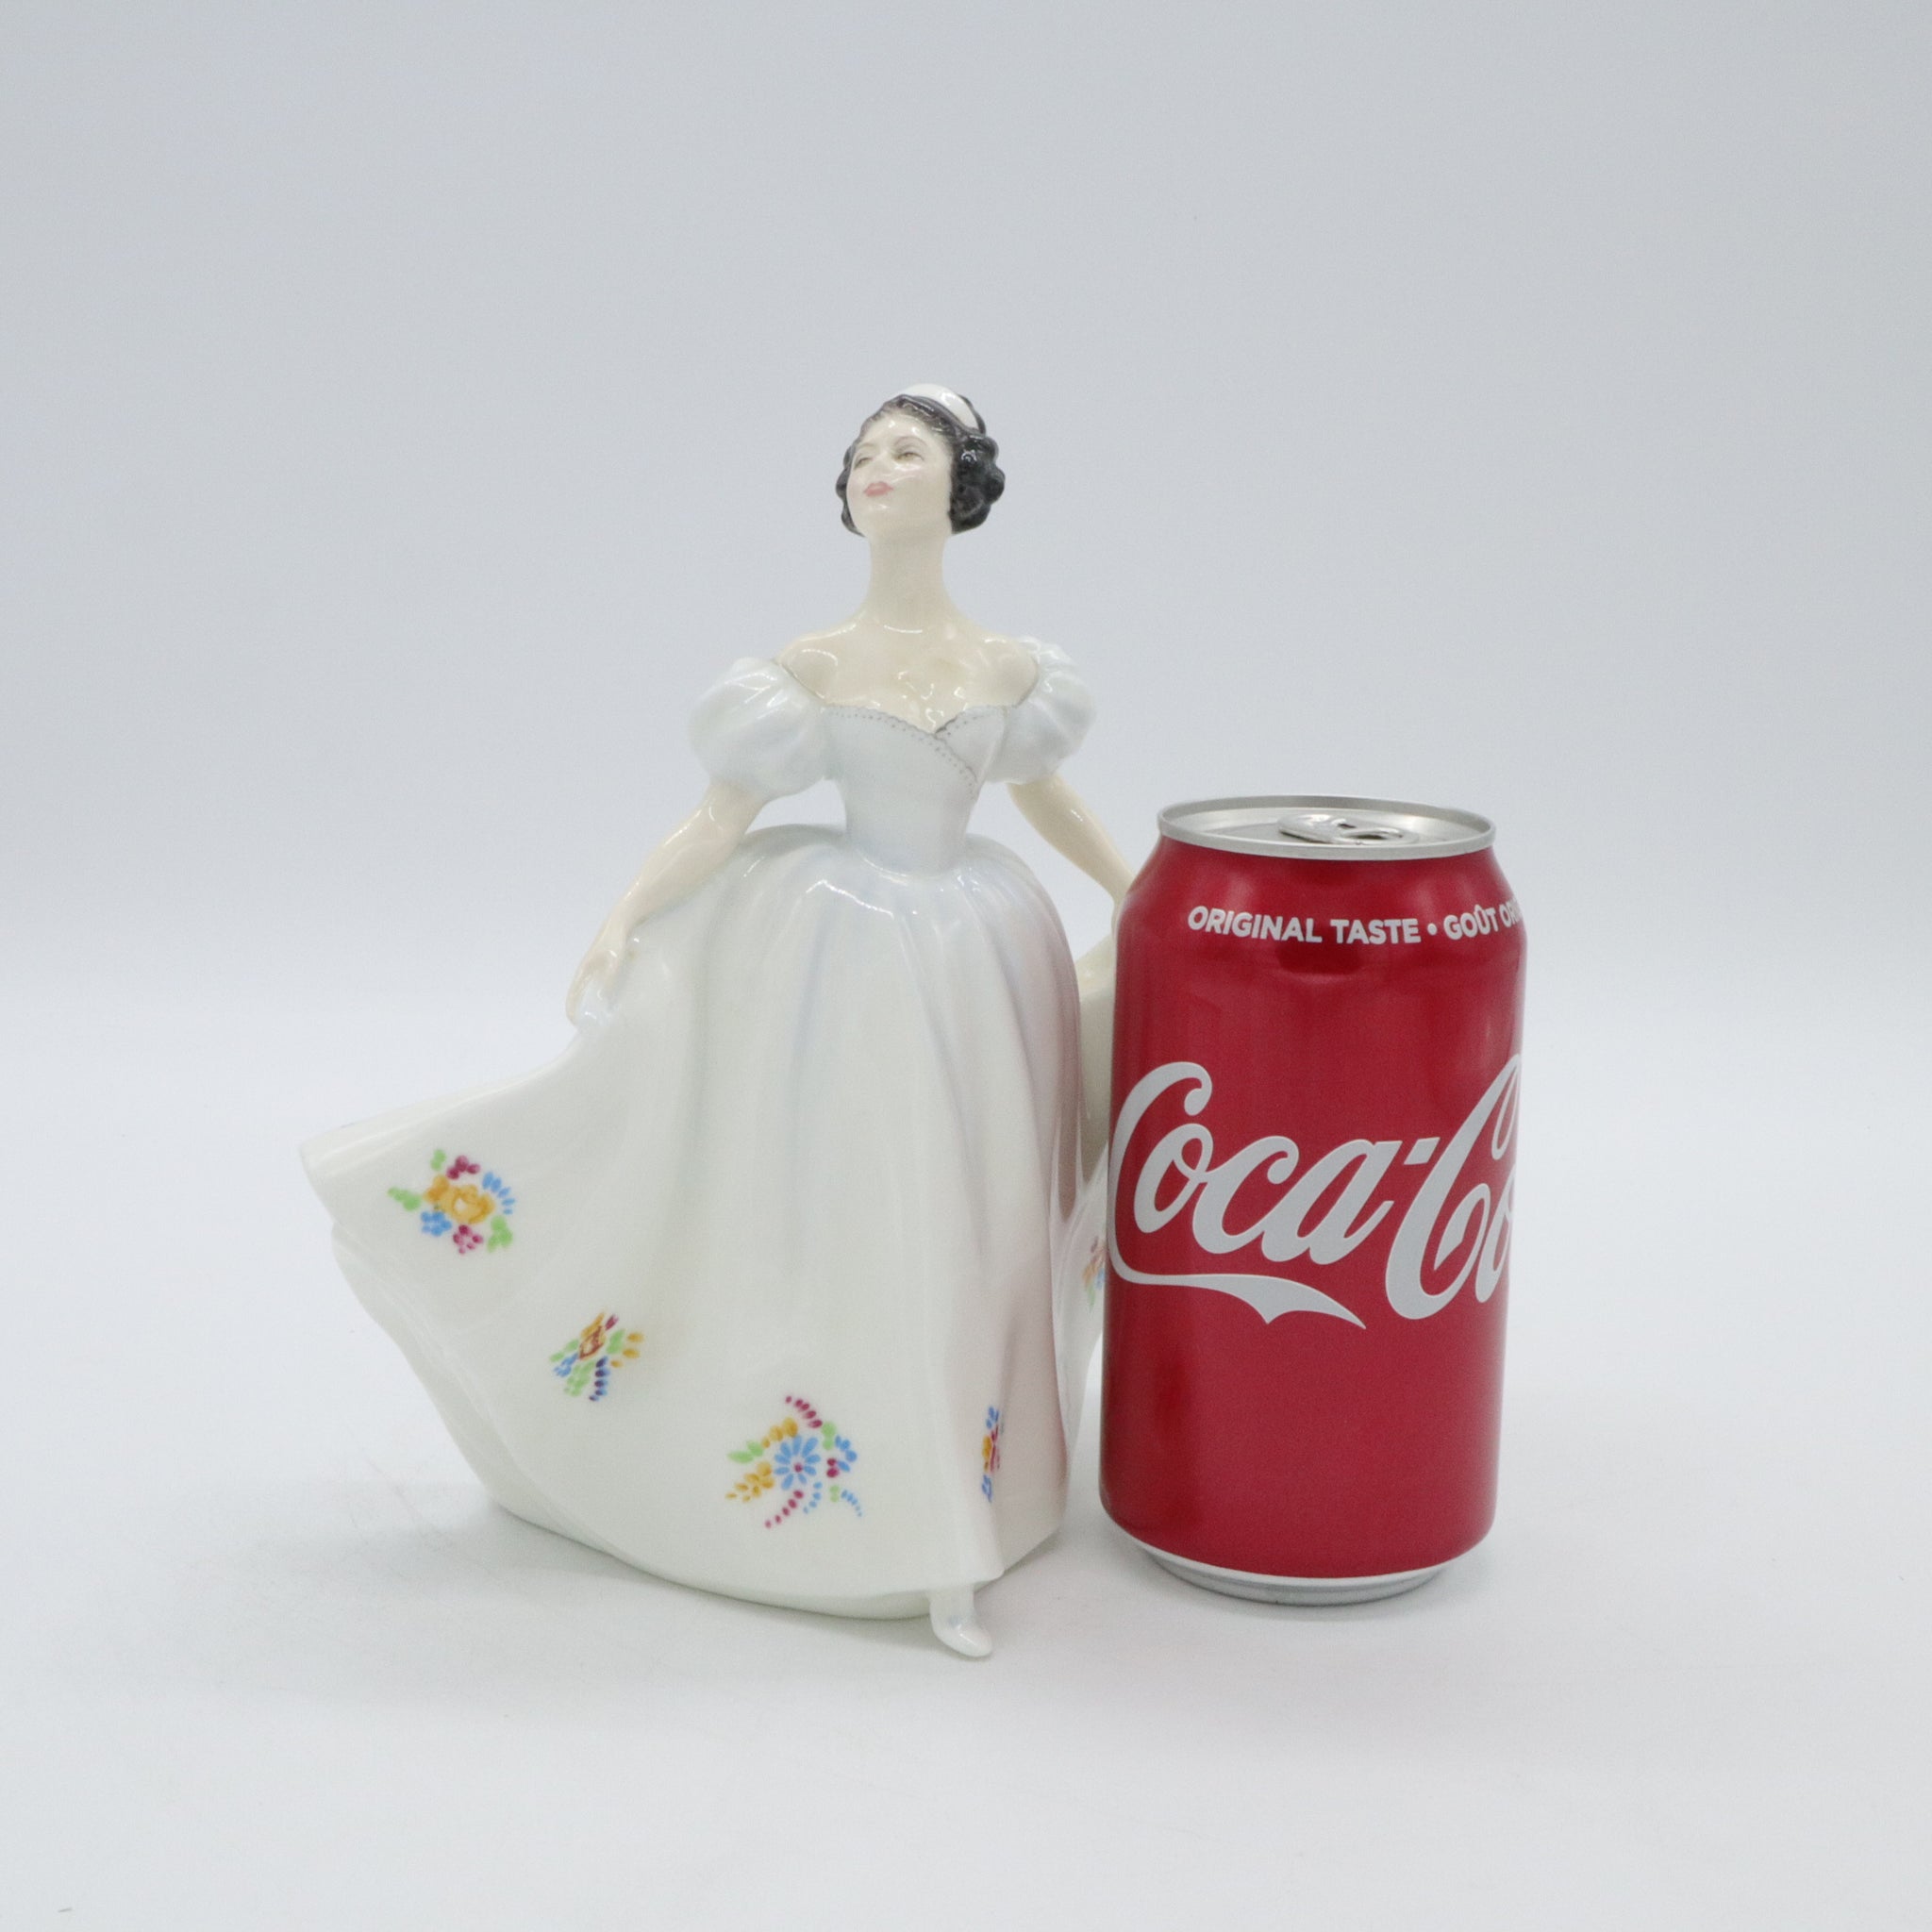 Collectable Vintage Figure , Designer Handcrafted Collectable Kate